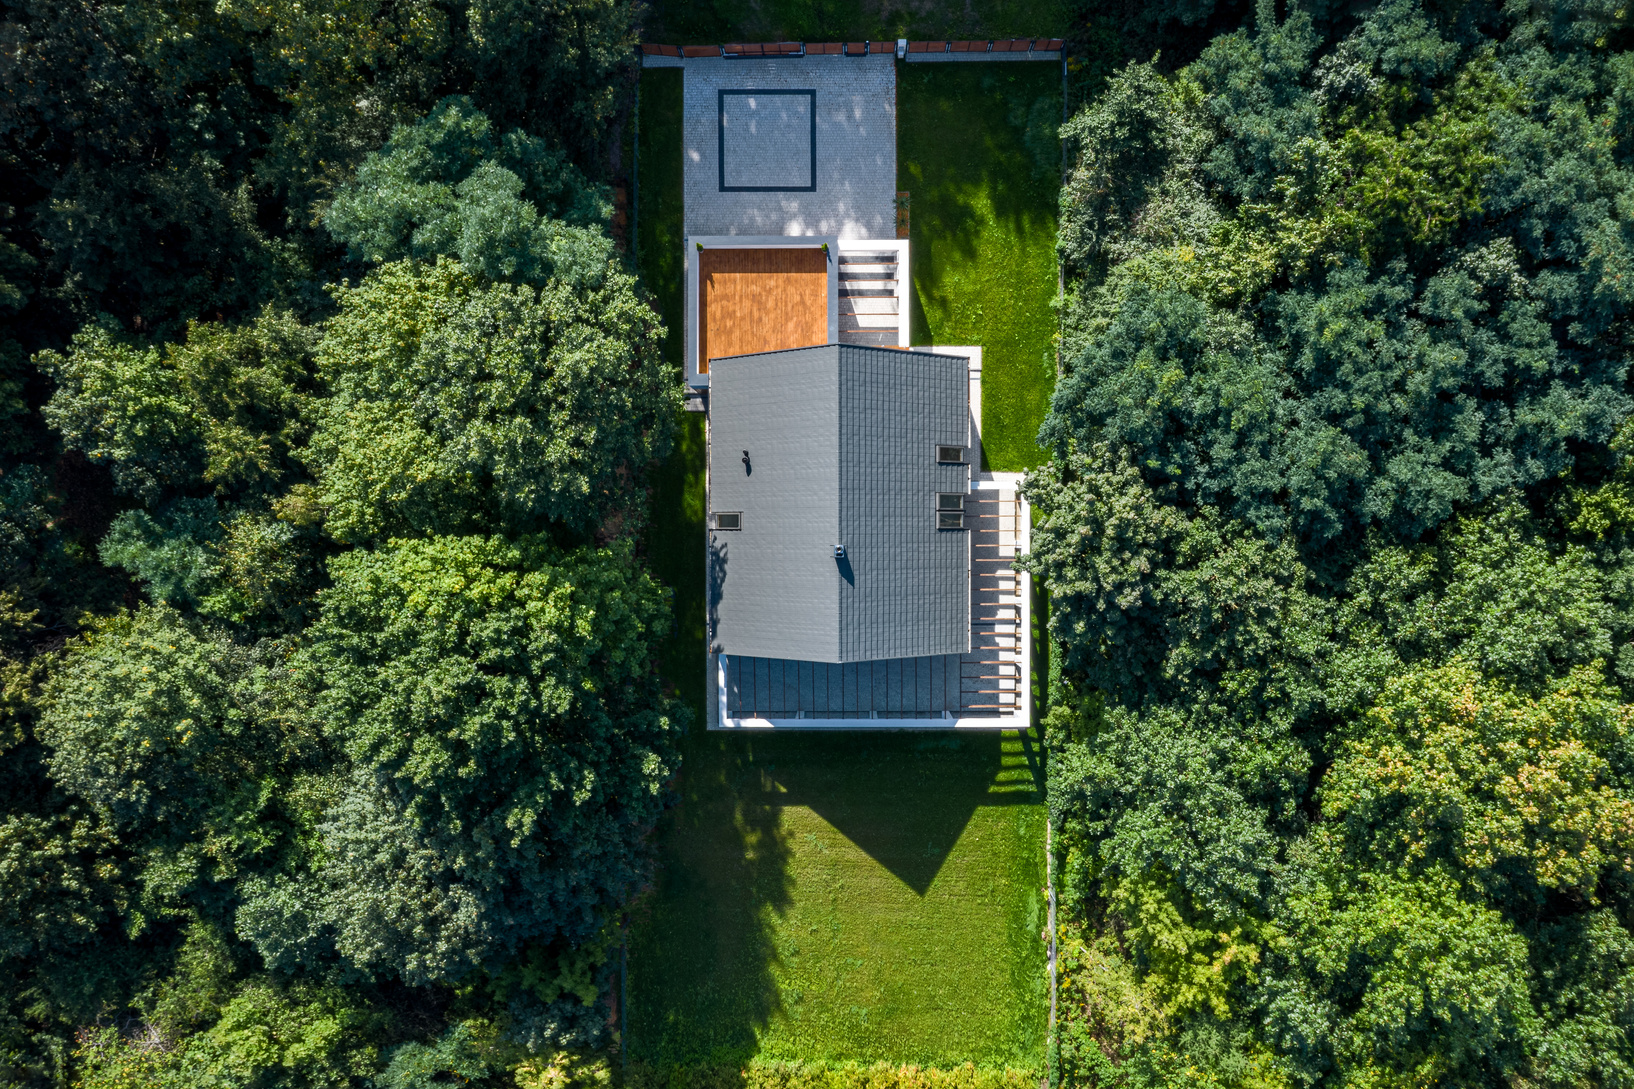 House in forest, drone view